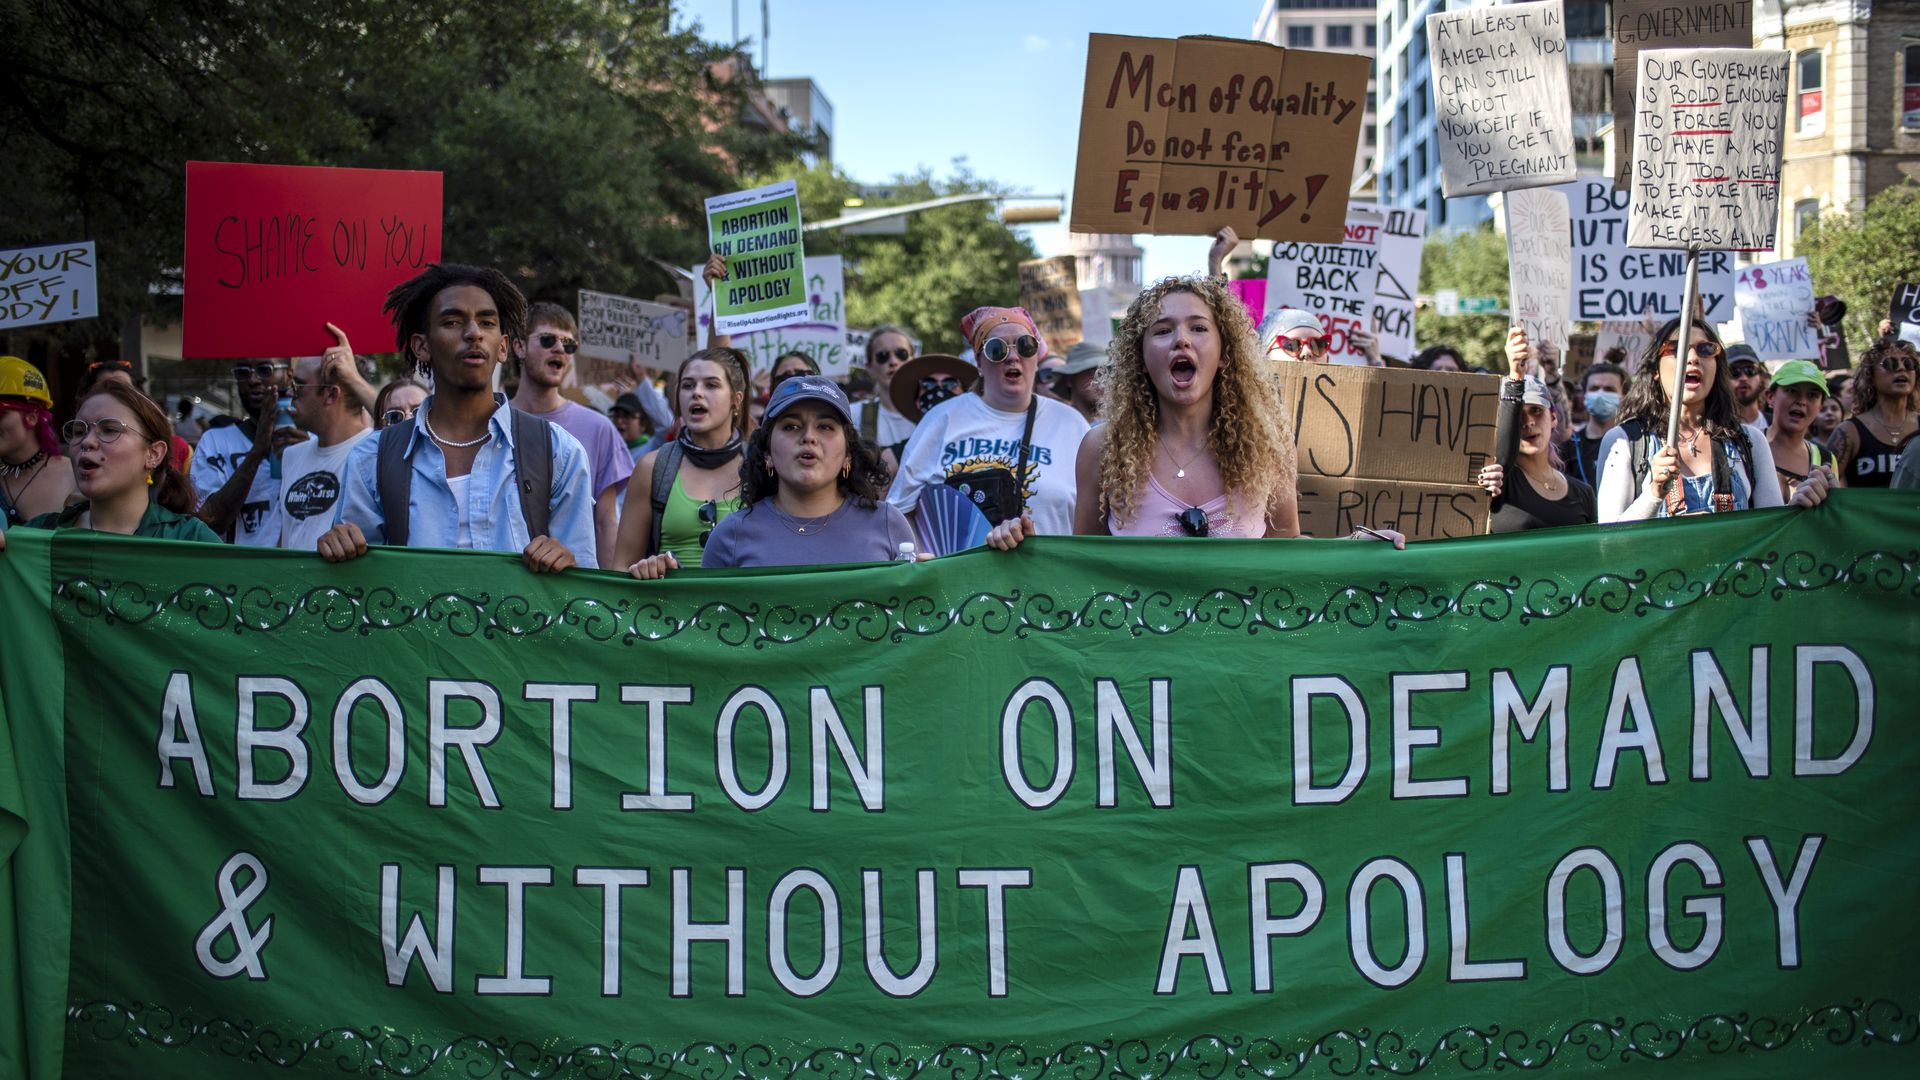 Protesters march while holding signs during an abortion-rights rally on June 25, 2022 in Austin, Texa